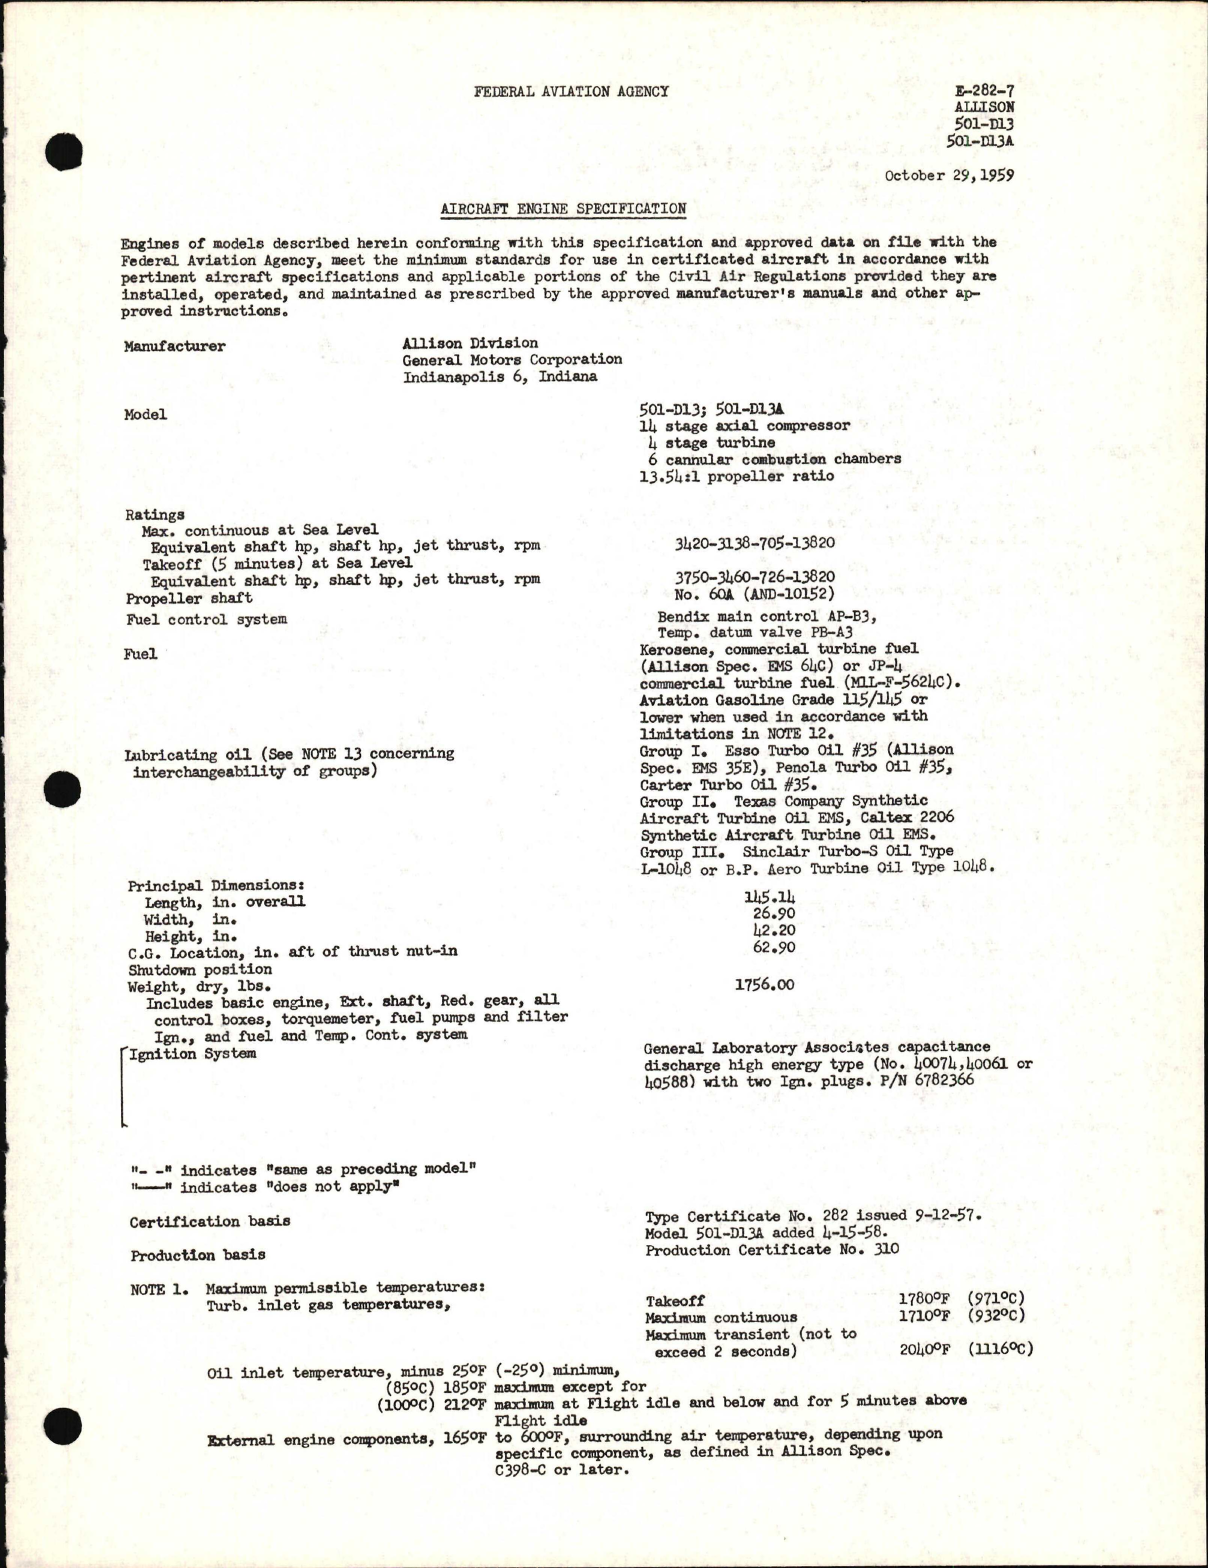 Sample page 1 from AirCorps Library document: 501-D13, 501-D13A